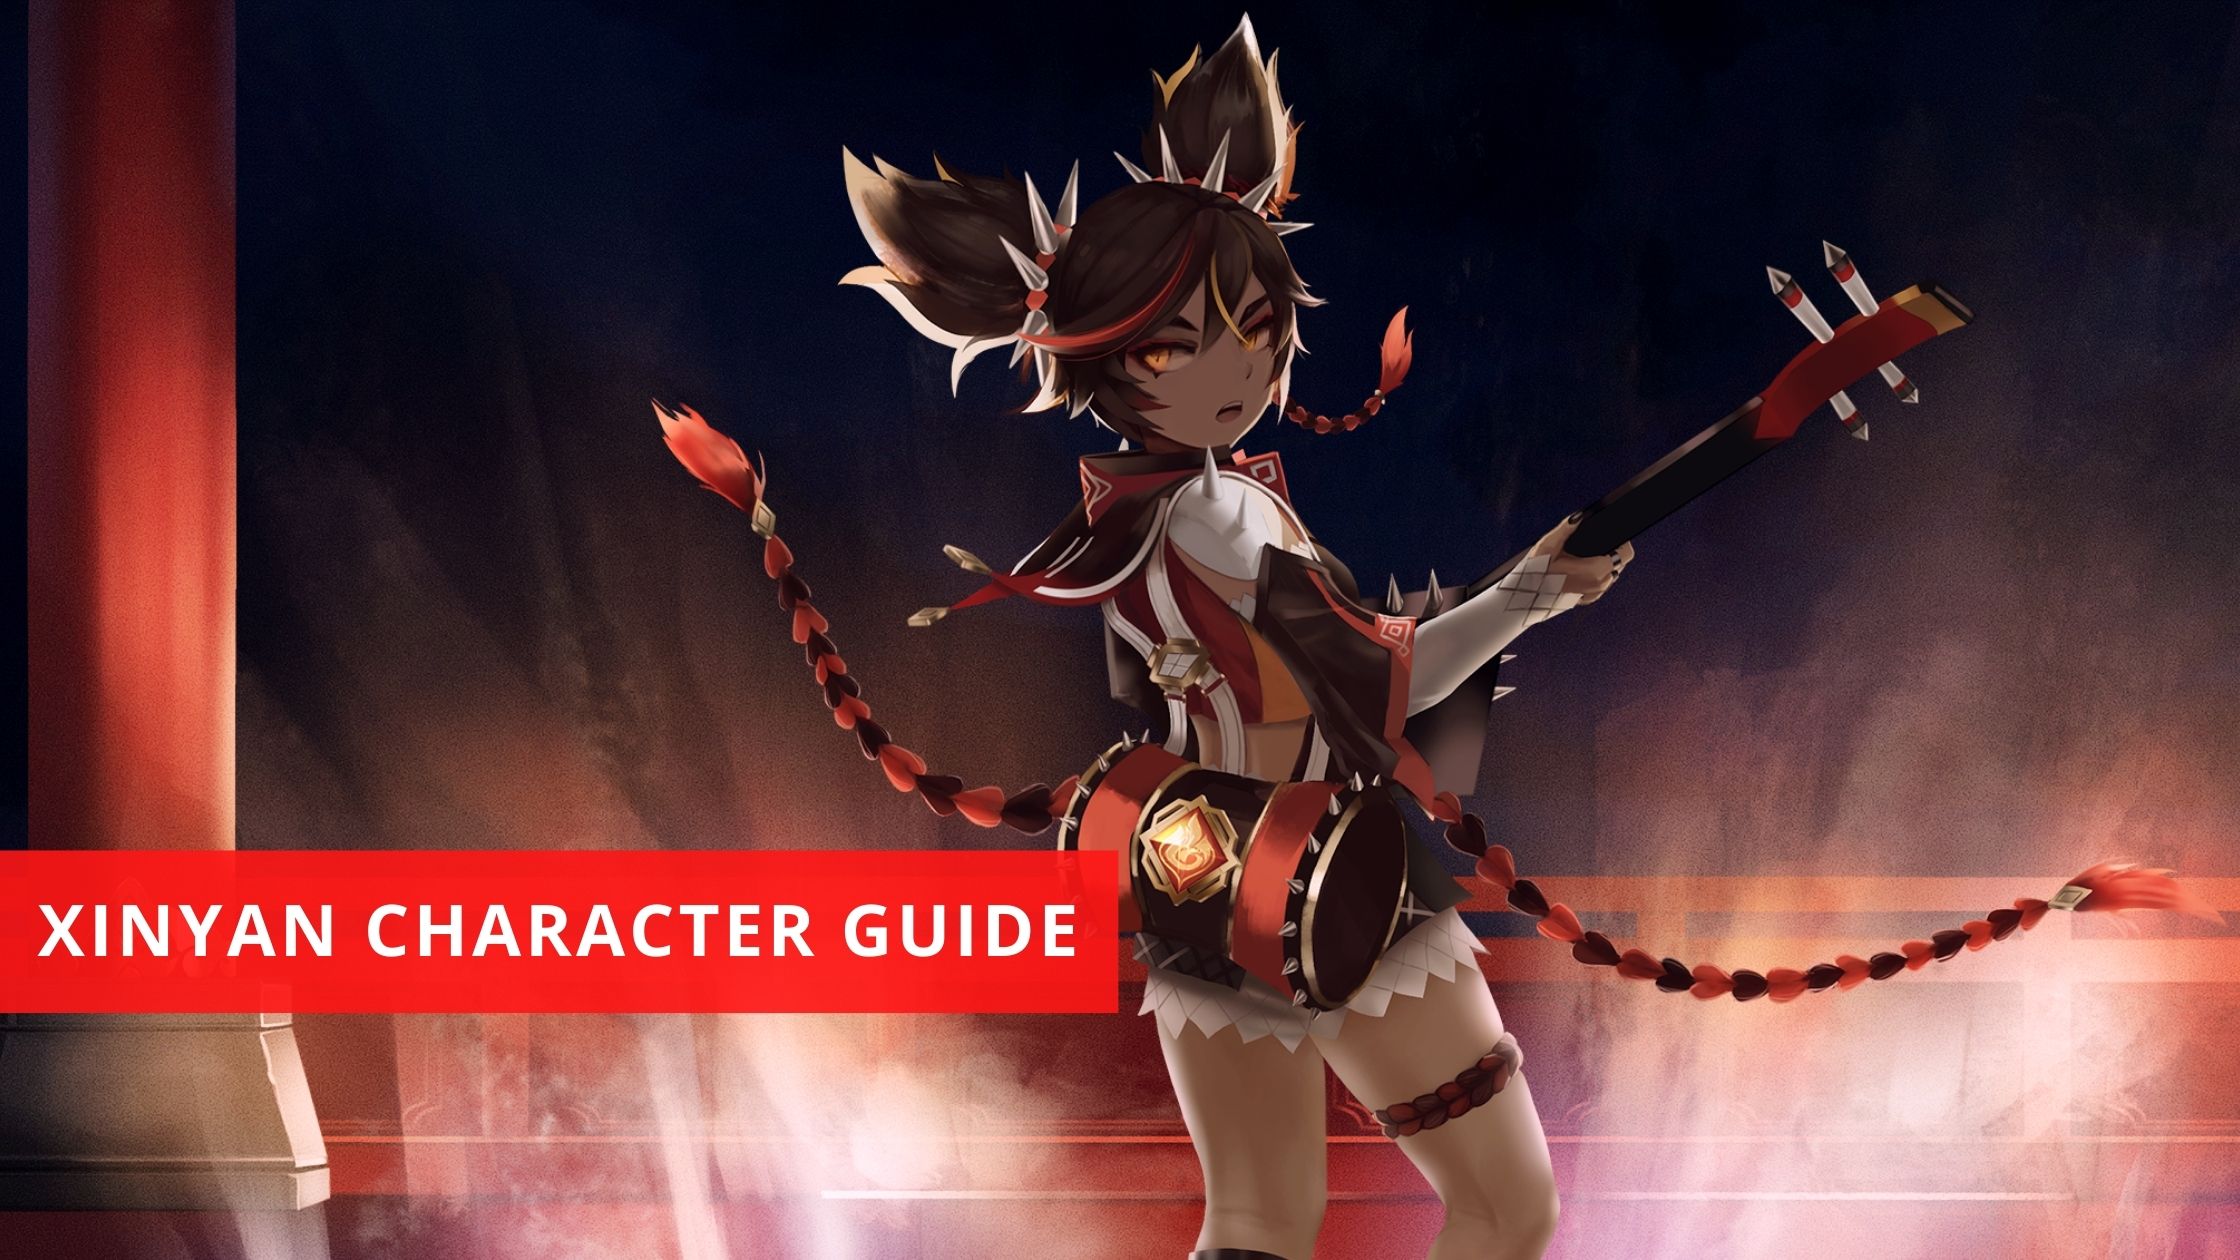 Genshin Impact Xinyan Character Guide: Abilities, Constellation and More. Touch, Tap, Play